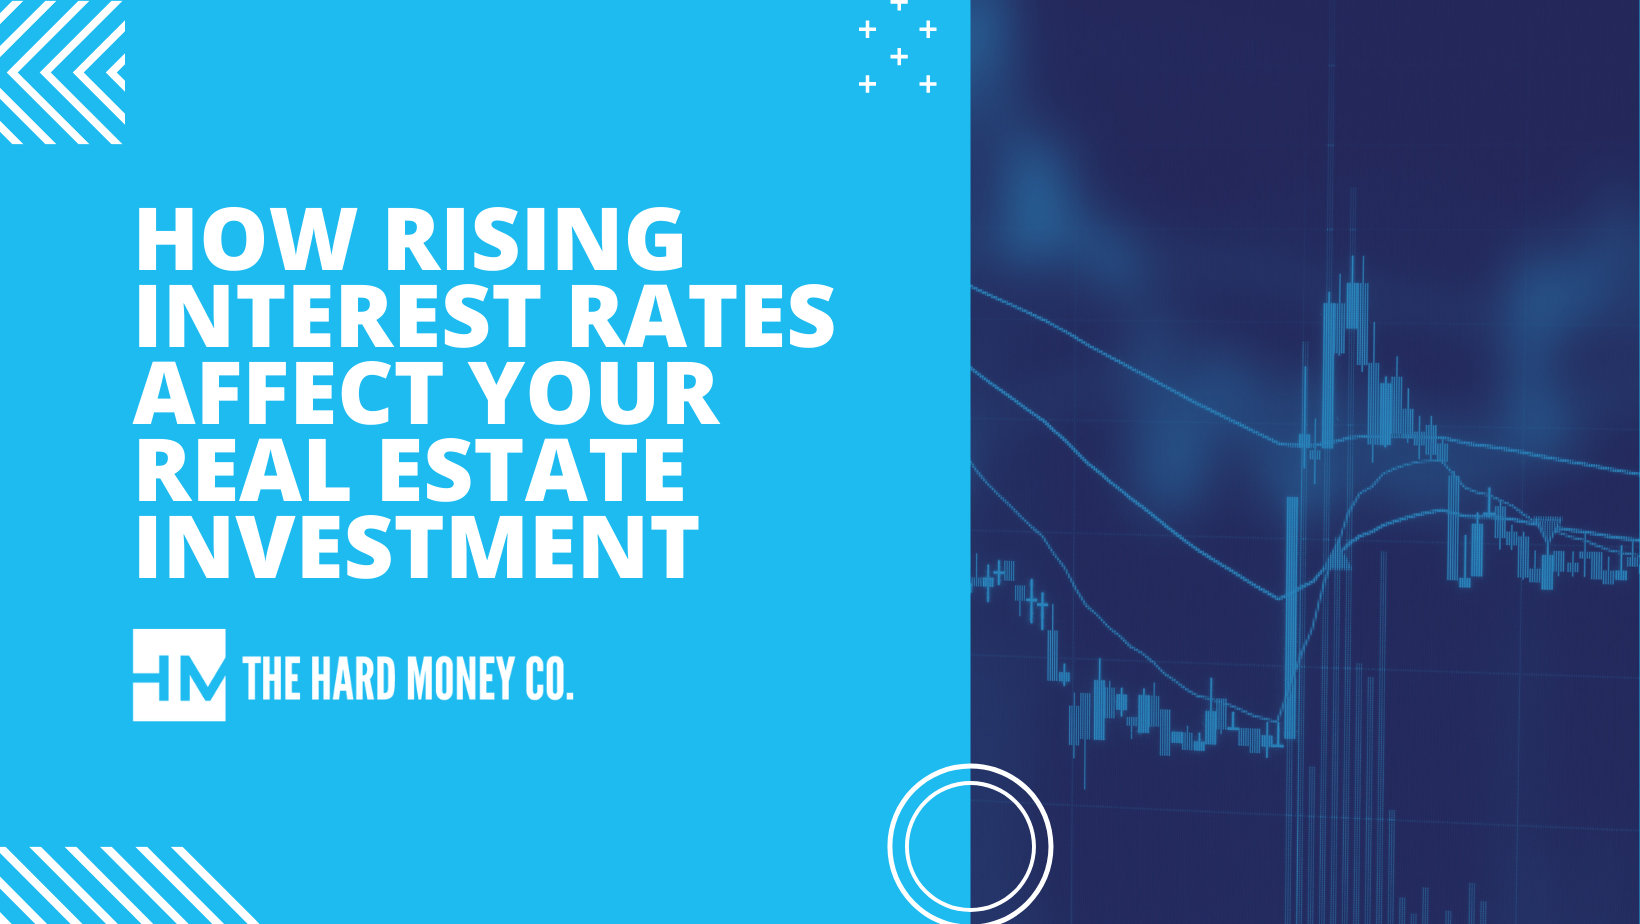 How Rising Interest Rates Affect Real Estate | The Hard Money Co.